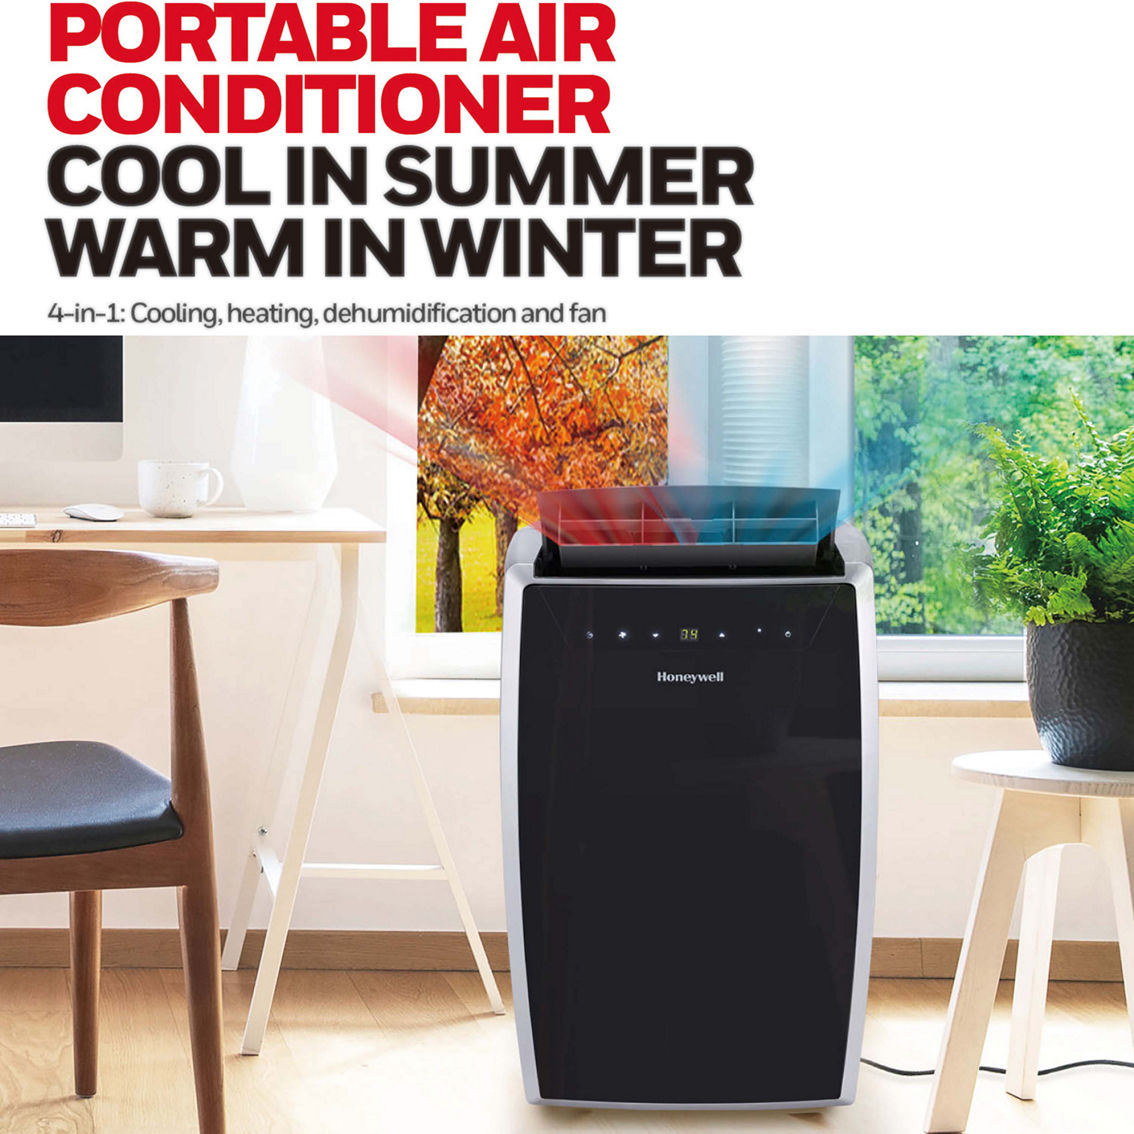 Honeywell 14,000 BTU Heat and Cool Portable Air Conditioner, Dehumidifier and Fan - Image 8 of 9